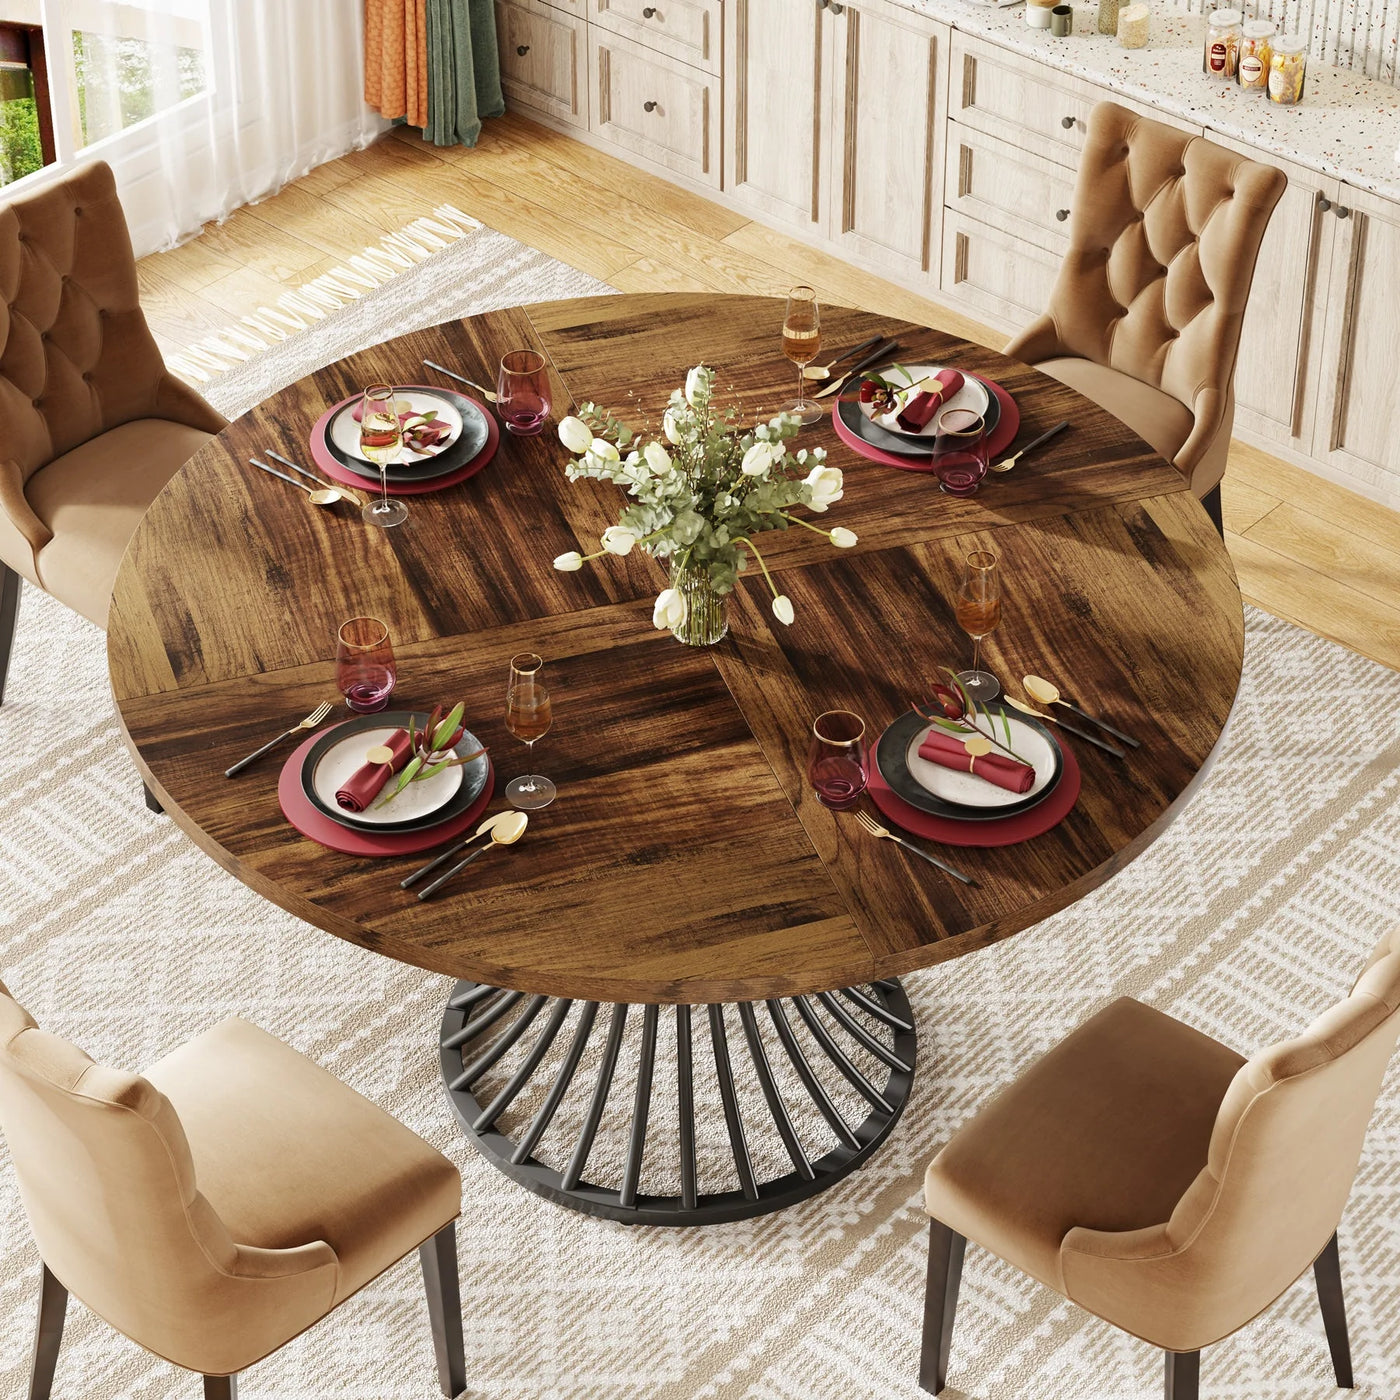 Hartet Round Wooden Dining Table for 4-6 People | Farmhouse Circle Kitchen Table